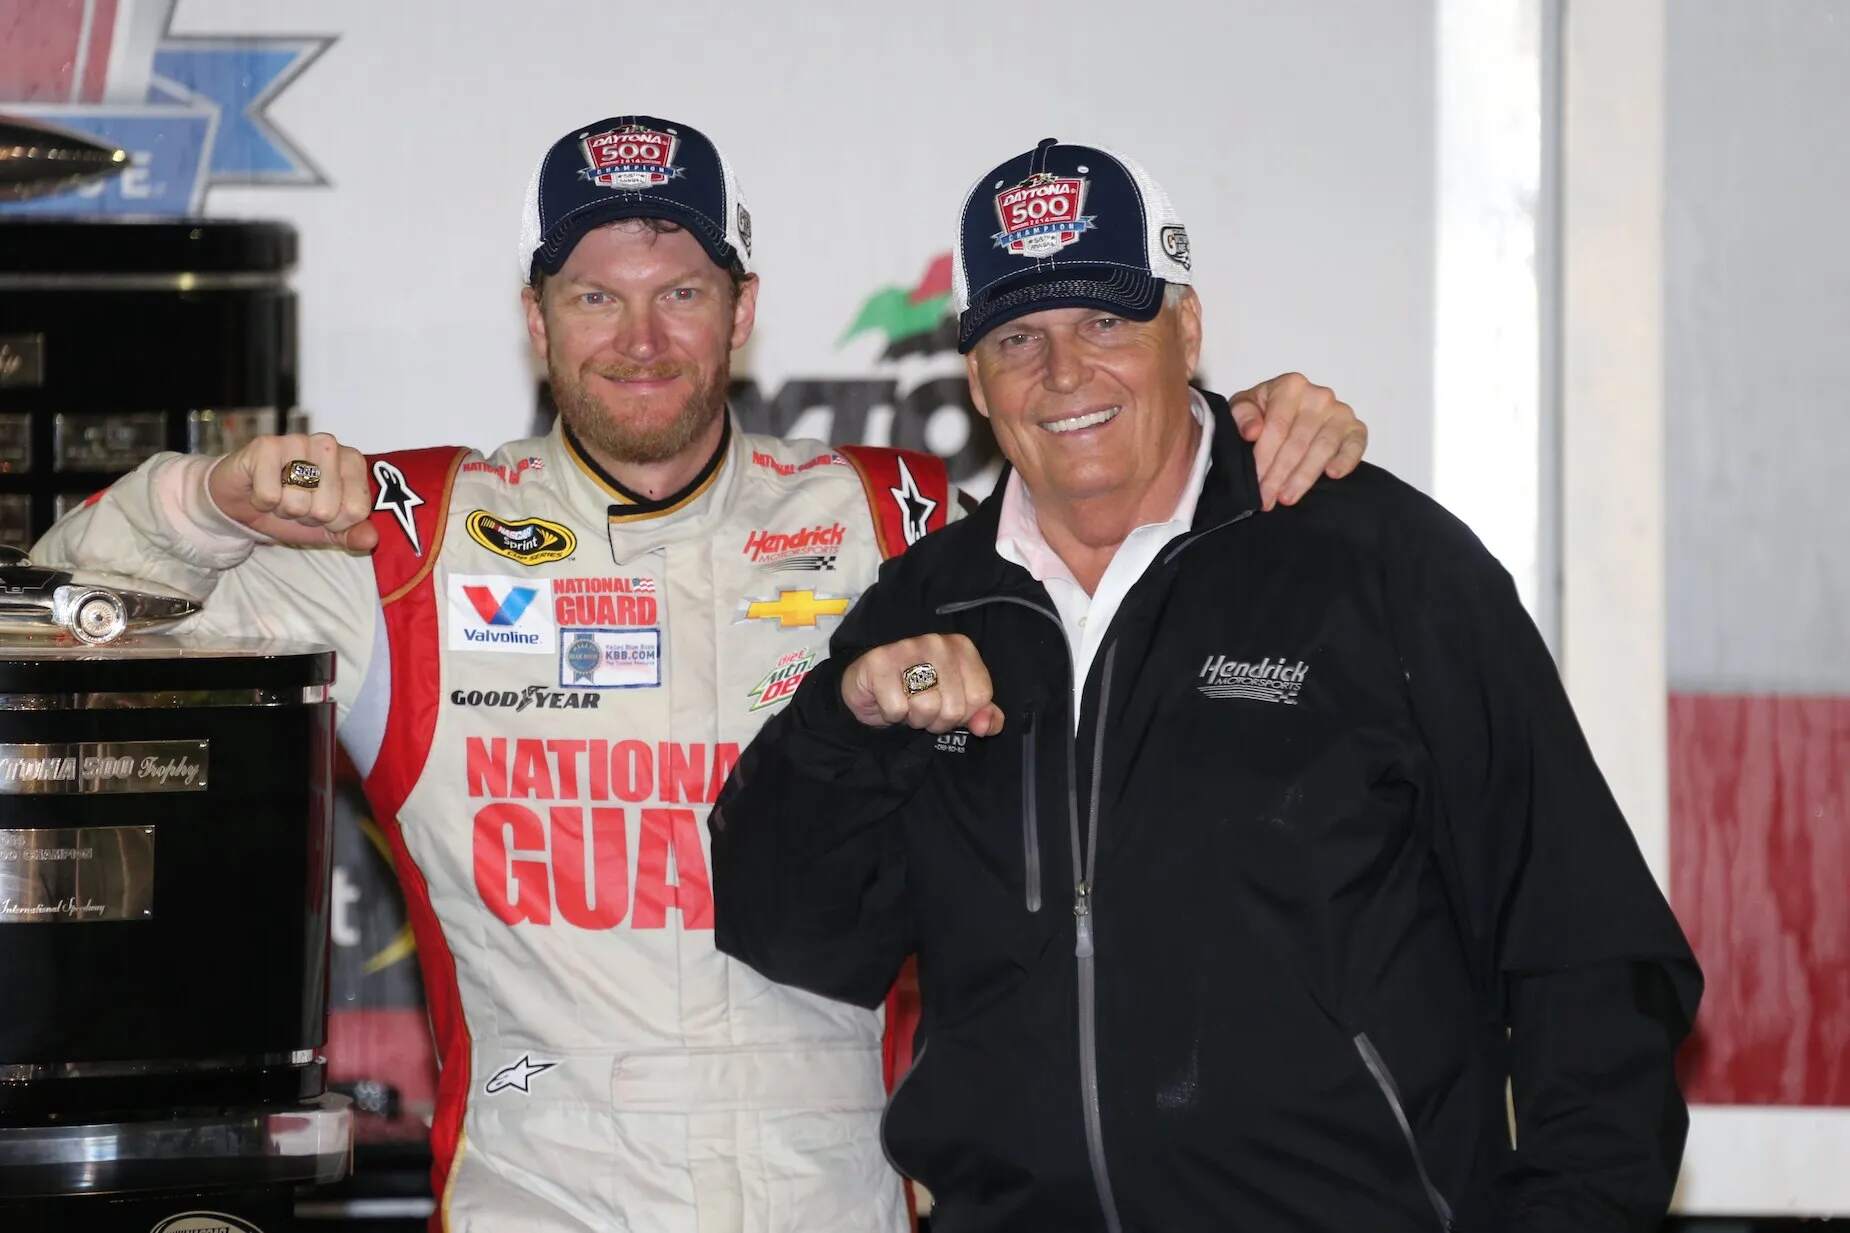 NASCAR driver Dale Earnhardt Jr. and owner Rick Hendrick show off their Daytona 500 rings in 2014